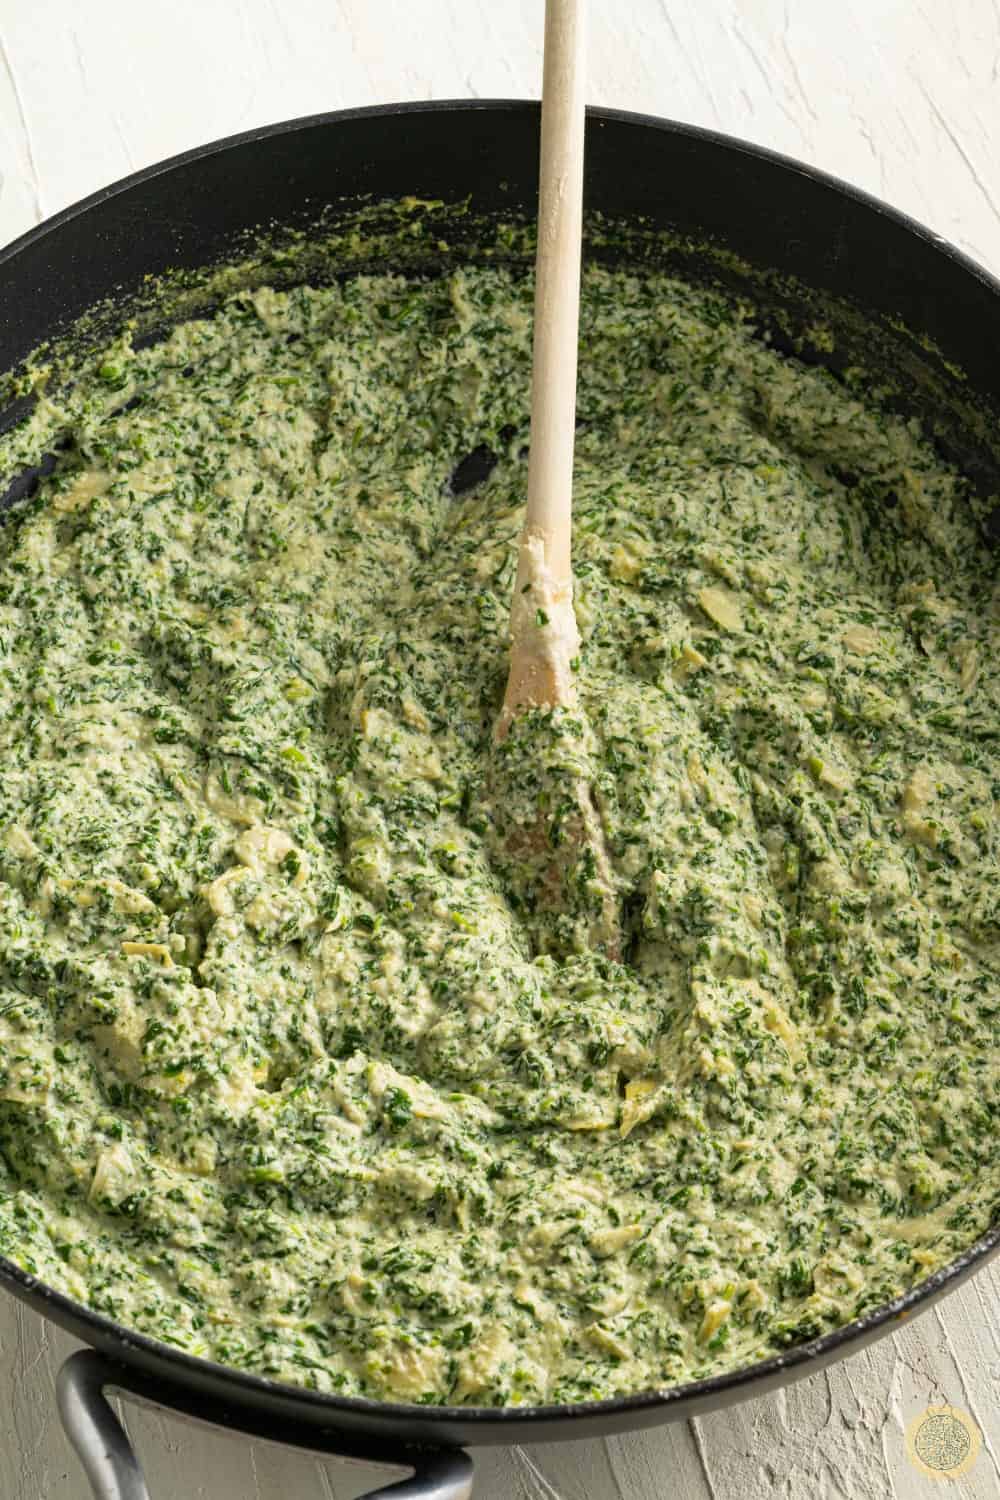 What to serve with warm spinach artichoke dip